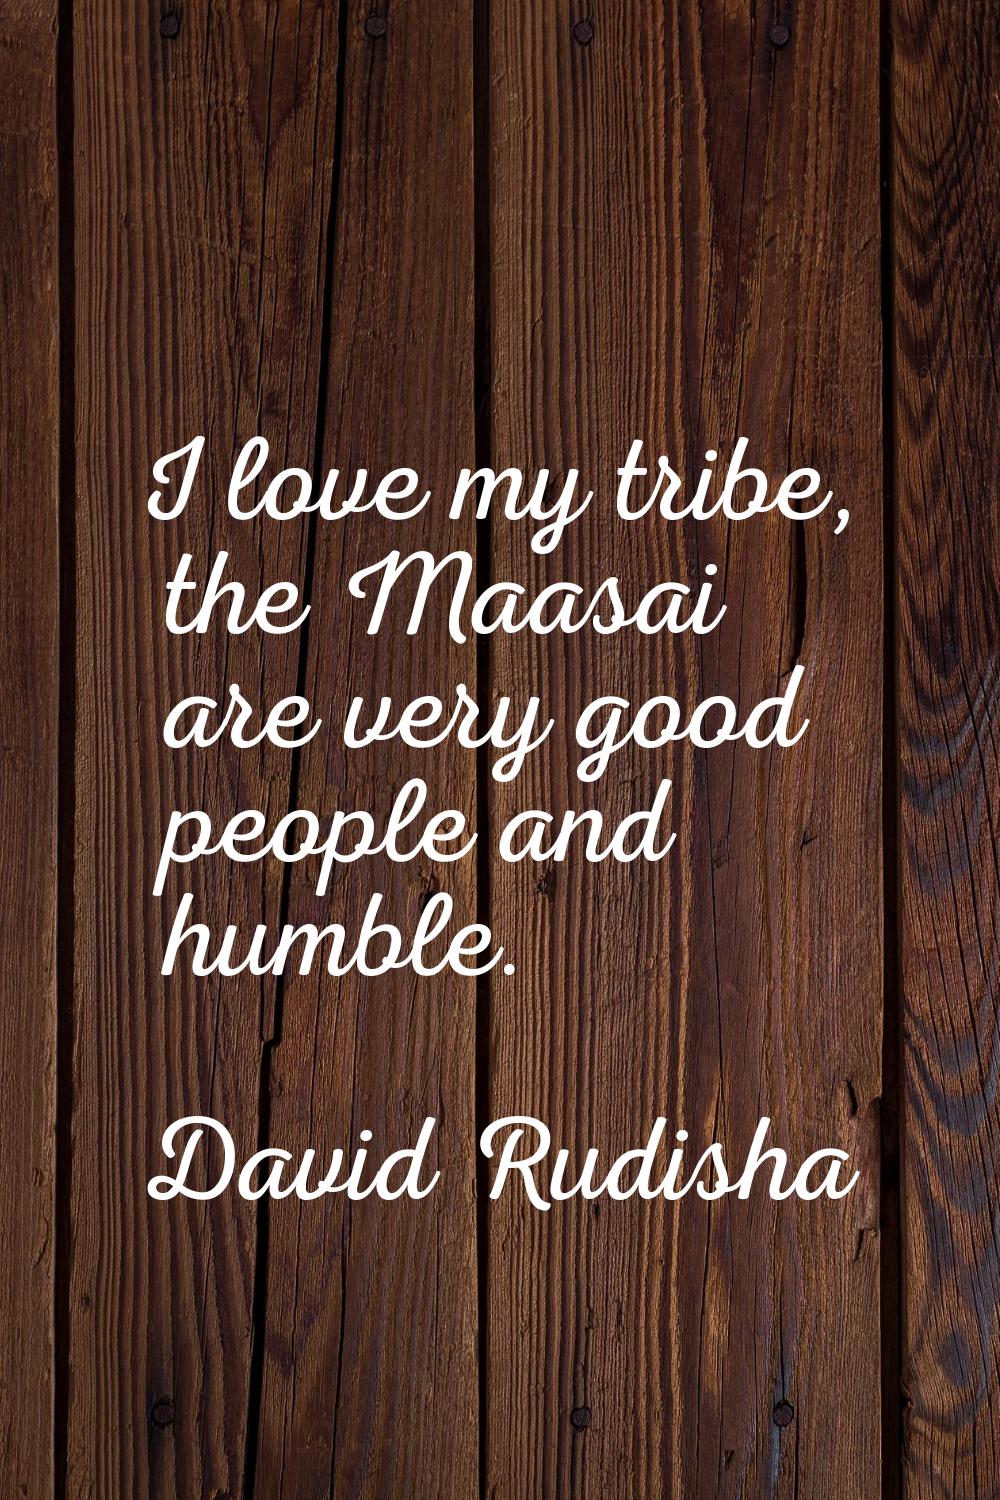 I love my tribe, the Maasai are very good people and humble.